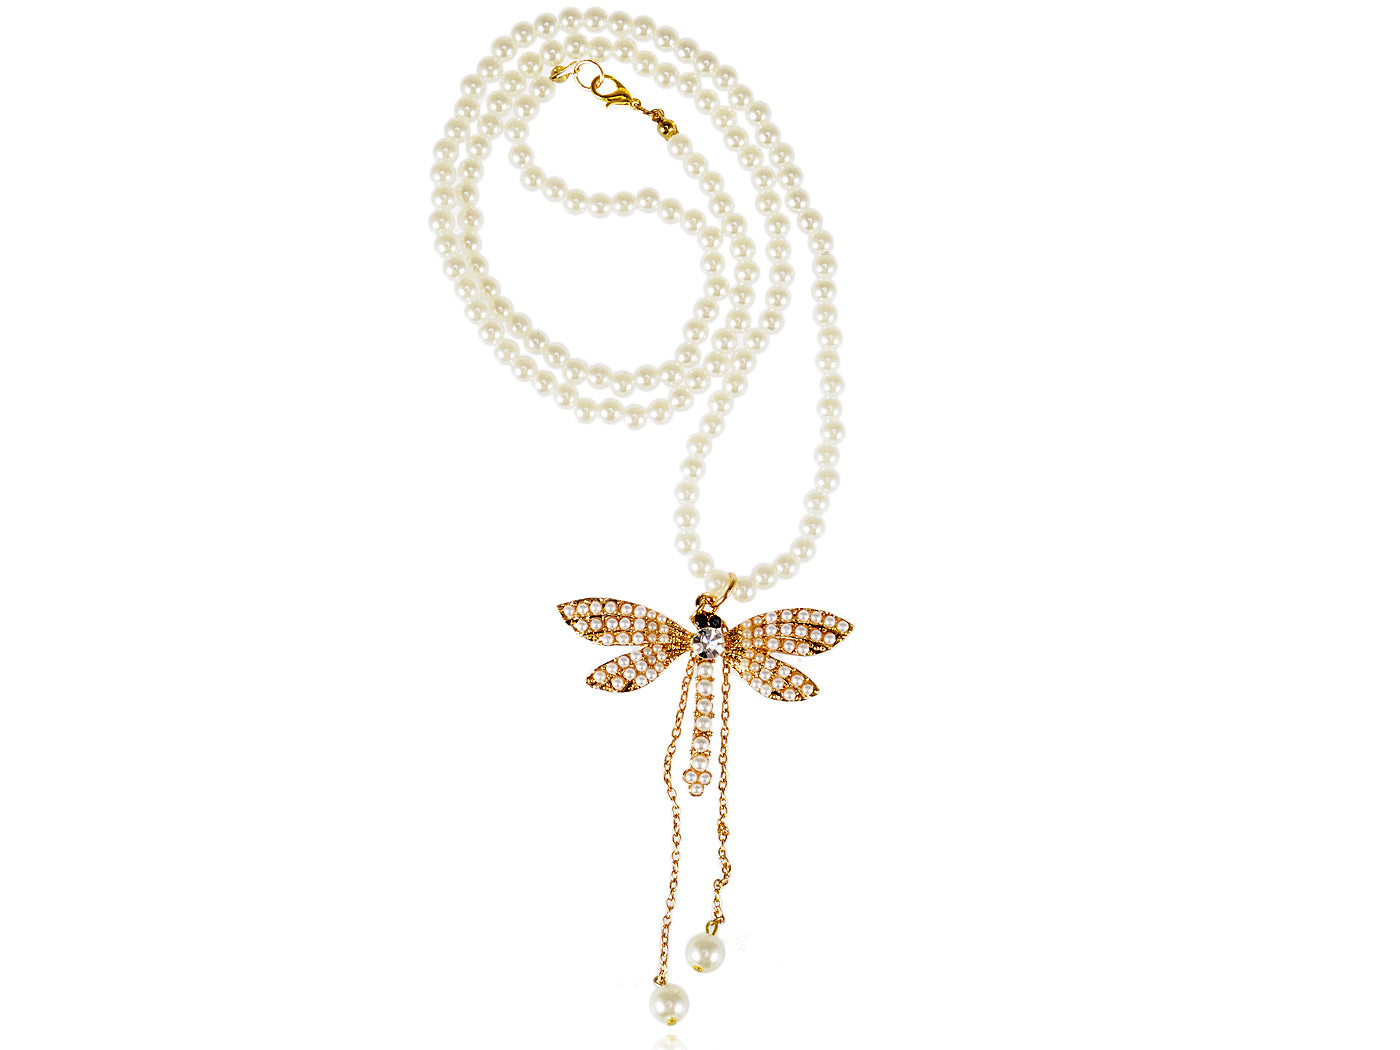 Pearl Like Beaded Cream Pastel Pink Dragonfly Insect Bridal Big Pendant Necklace